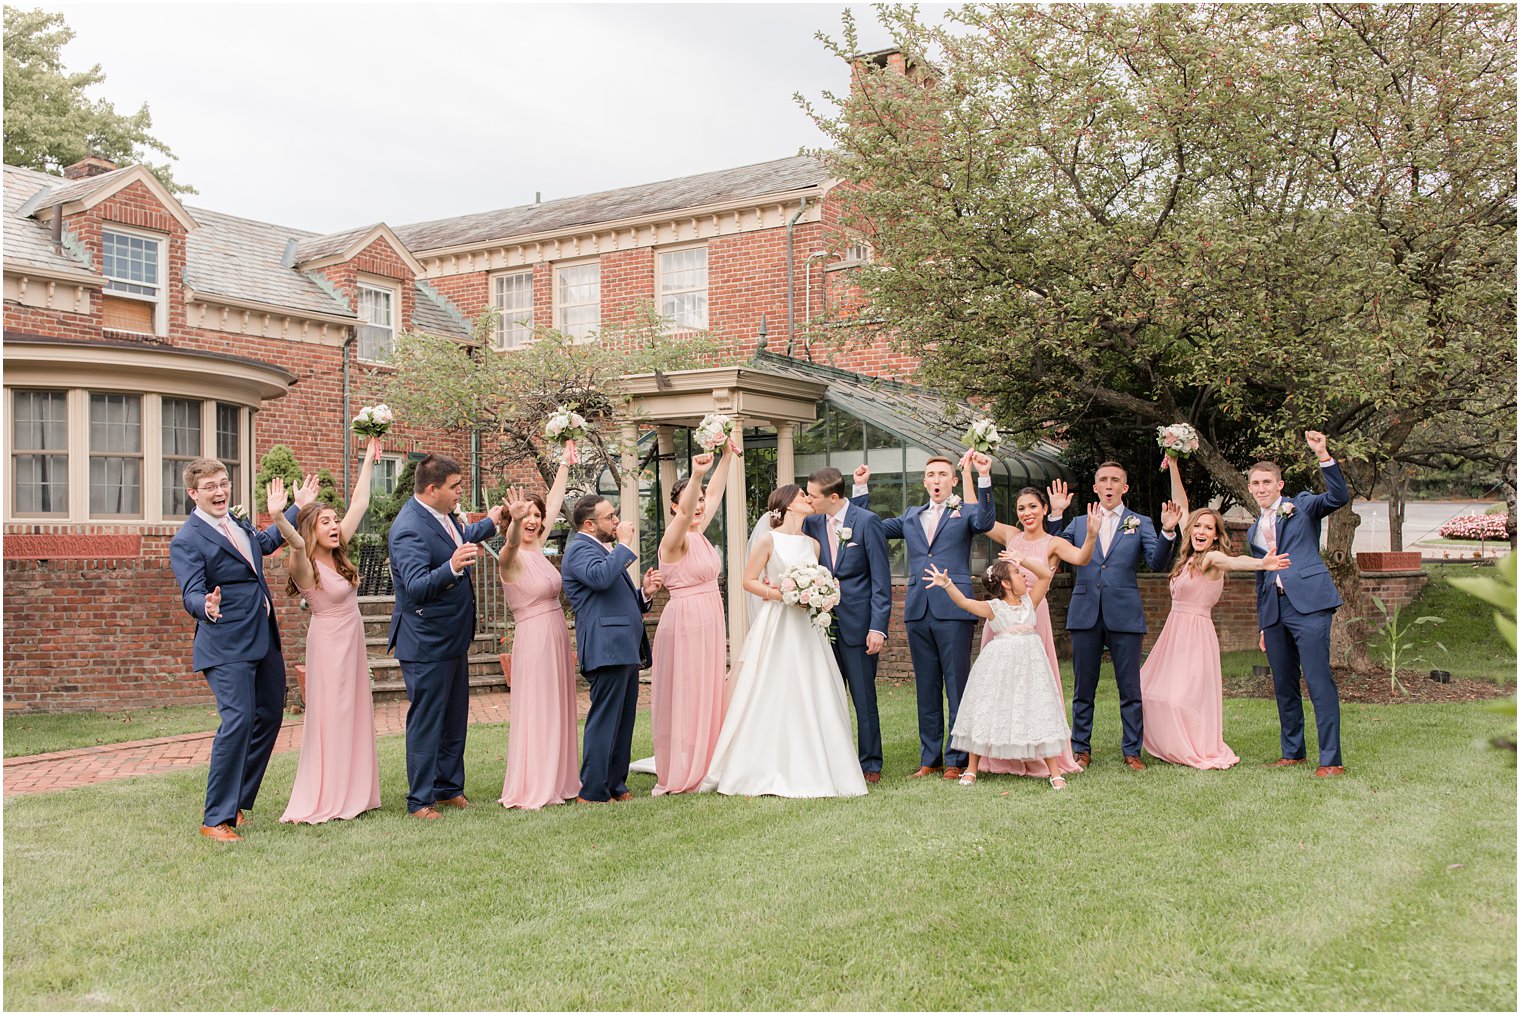 Bridal party cheering for bride and groom